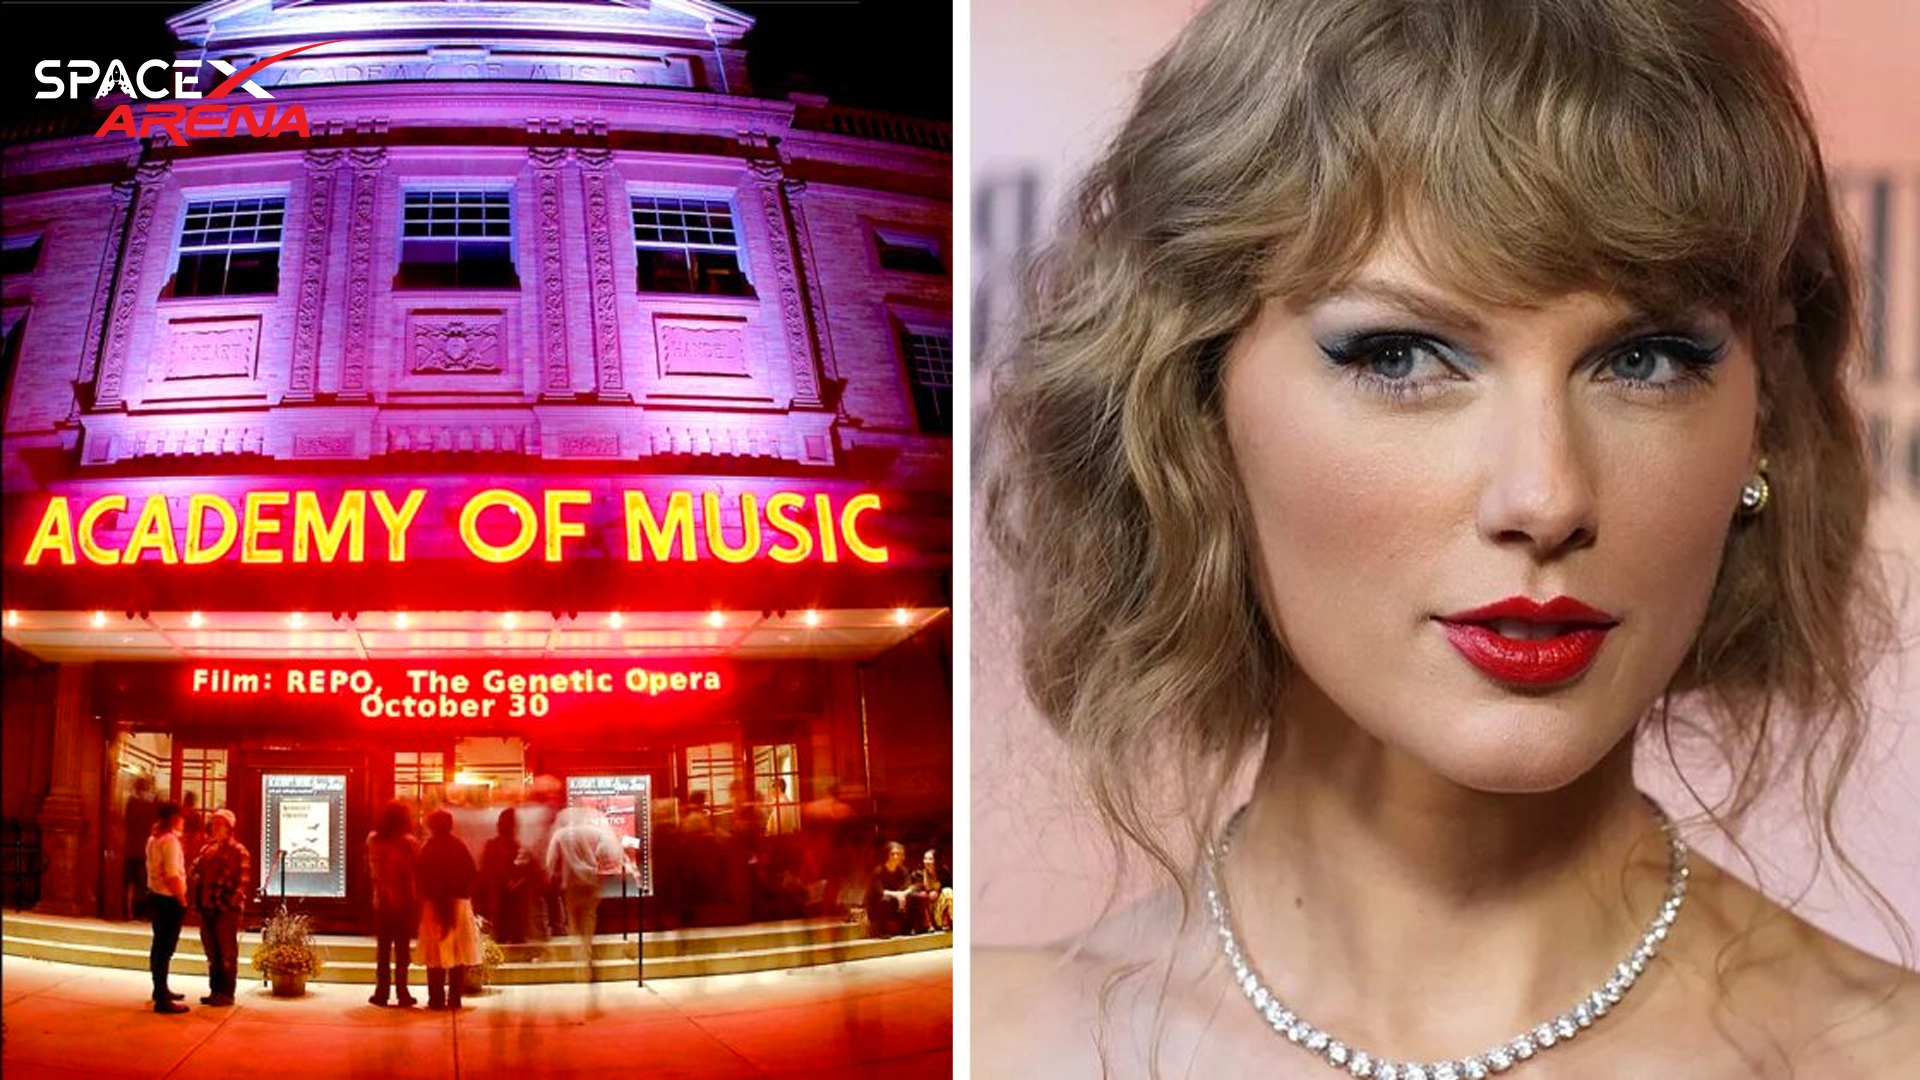 Taylor Swift gets a life time ban from the Academy of Music for being woke